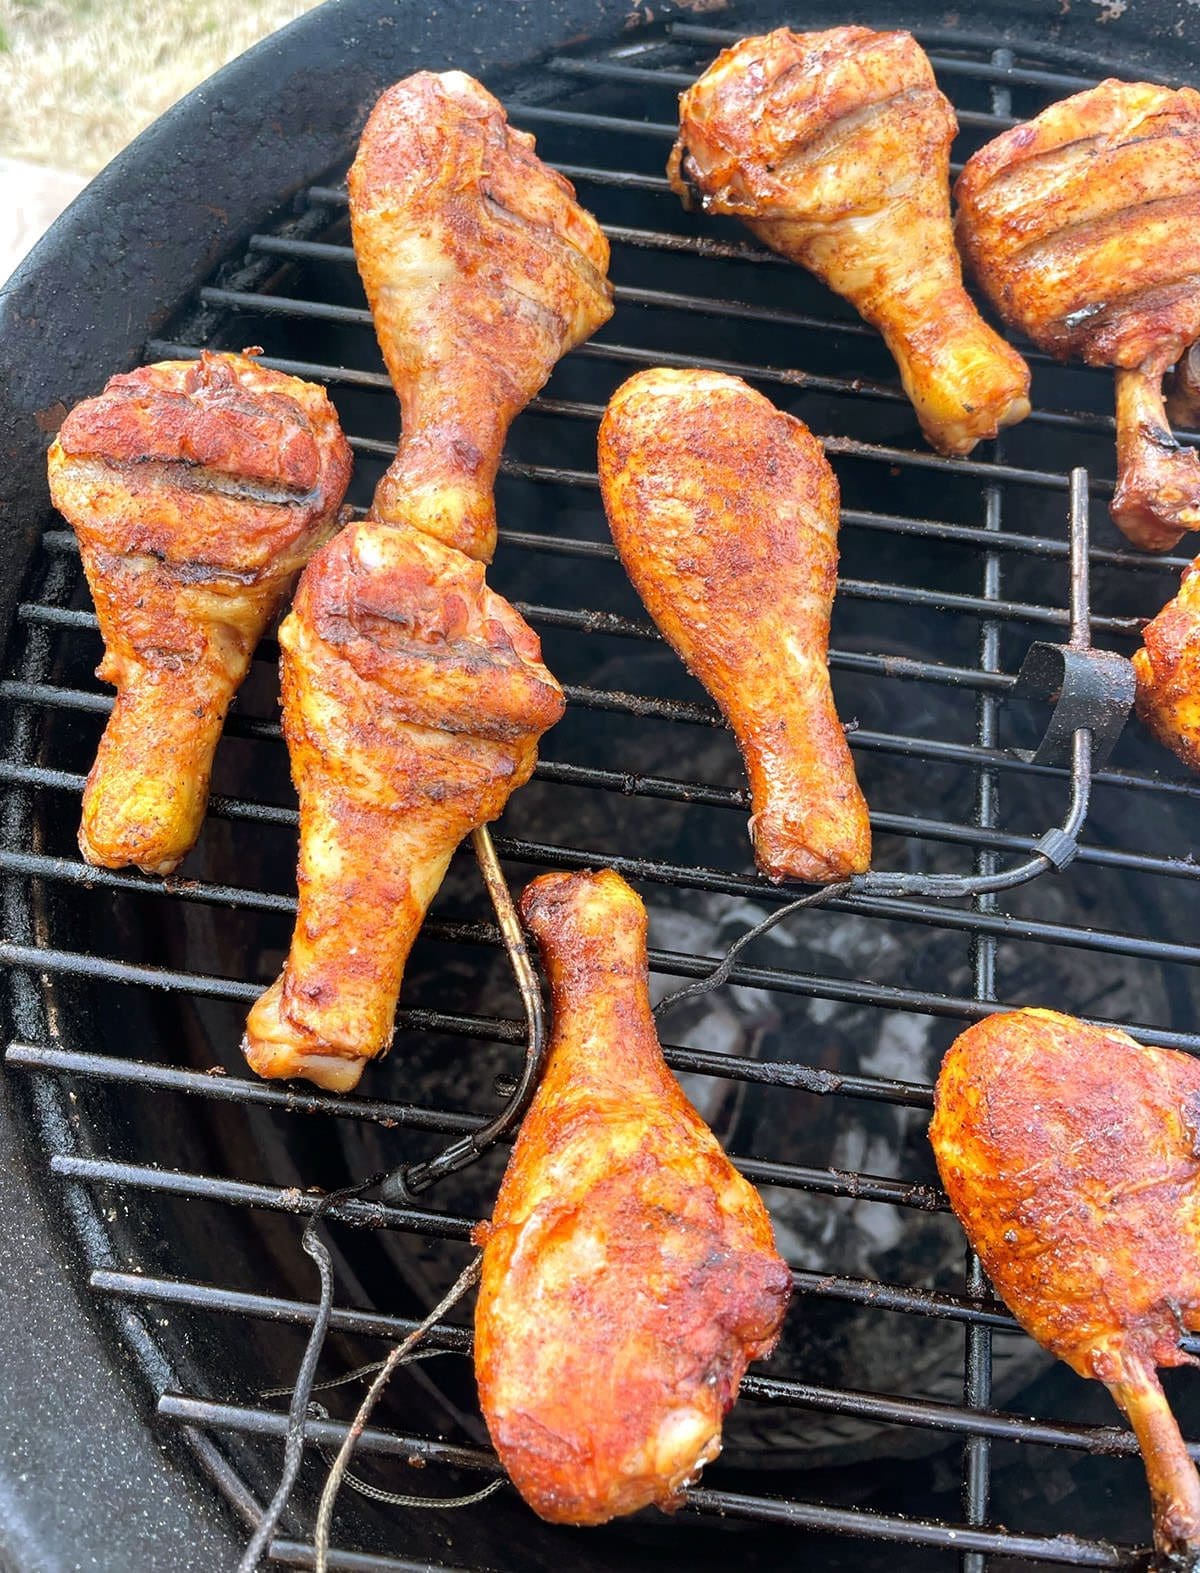 Poultry cooking on a grill.